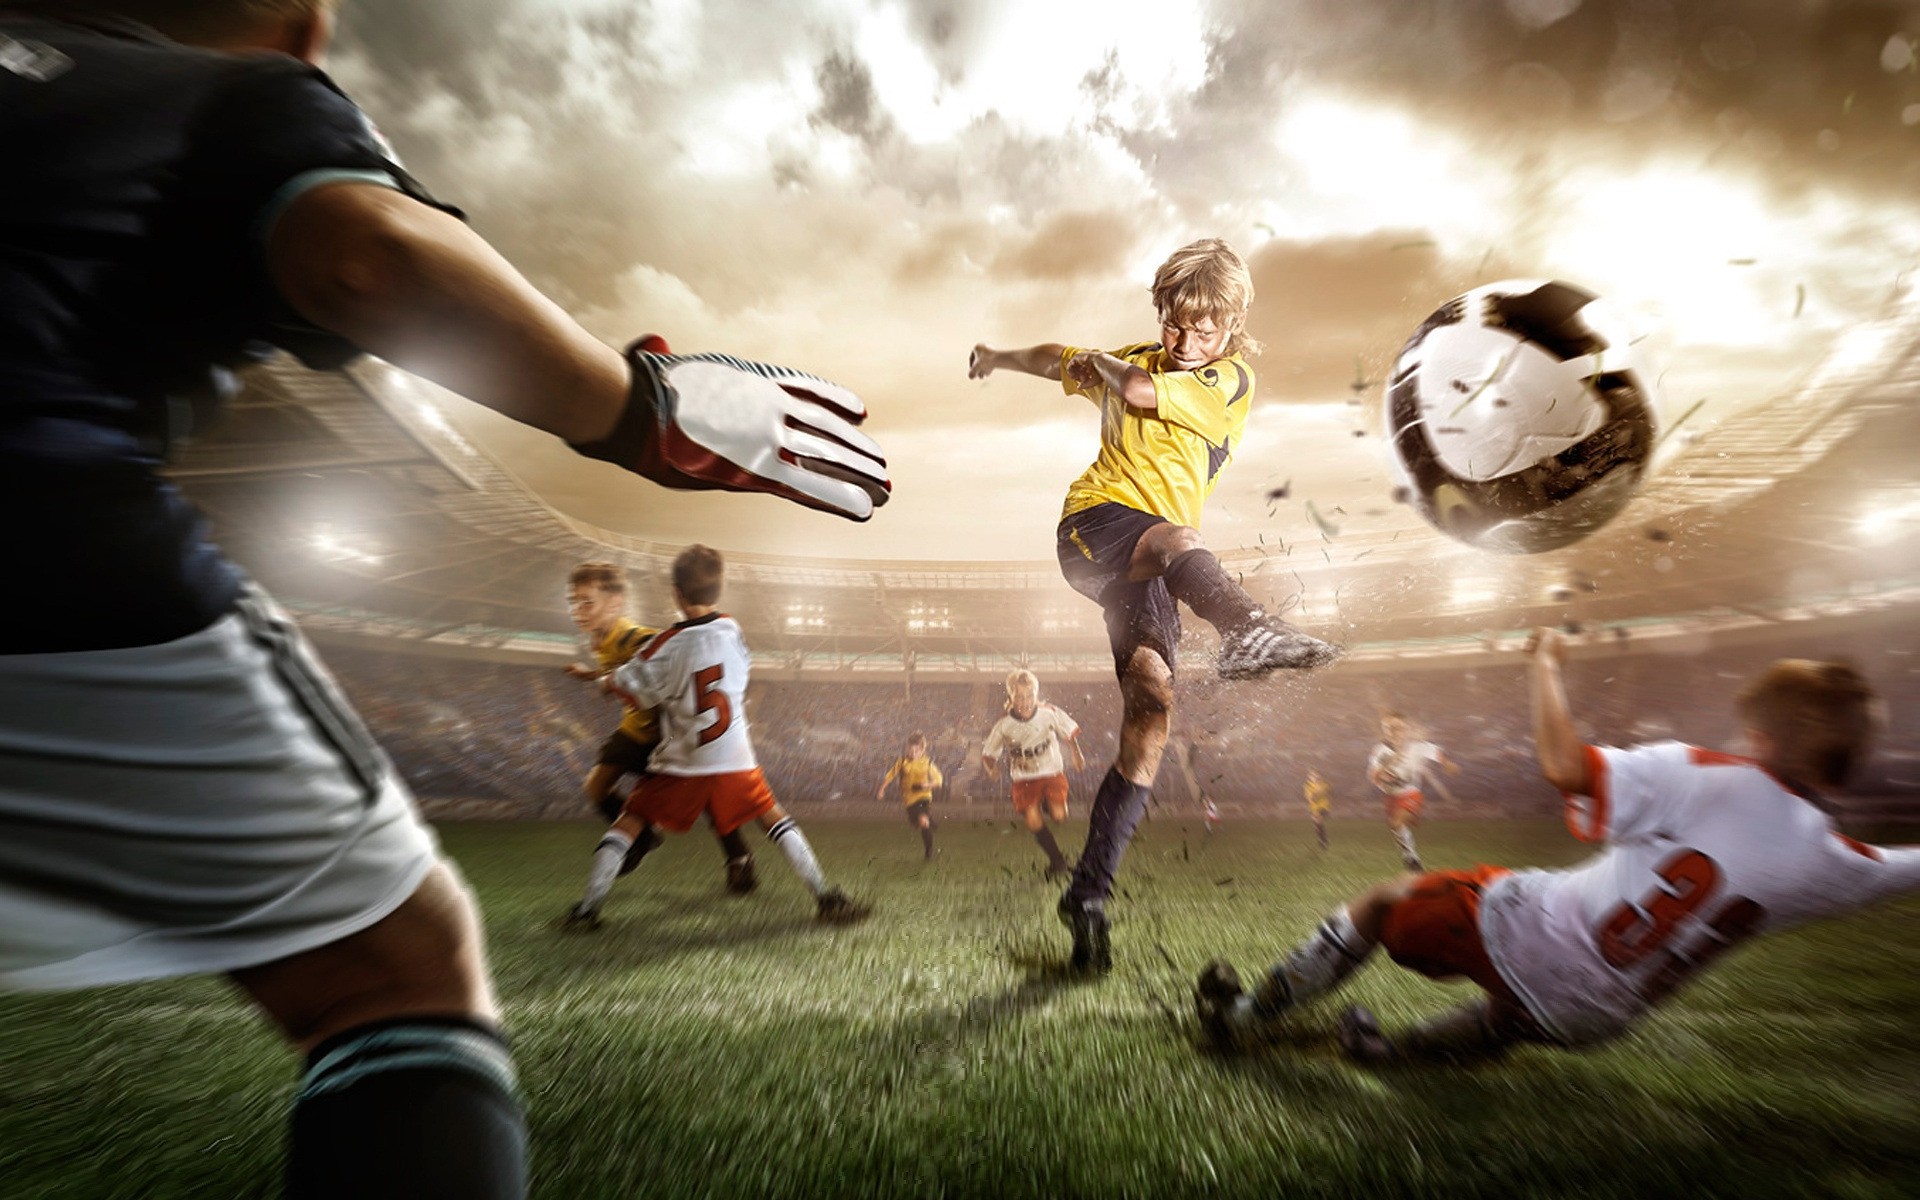 photo manipulation competition soccer ball football game athlete motion stadium adult soccer ball recreation uniform action goal man woman kids